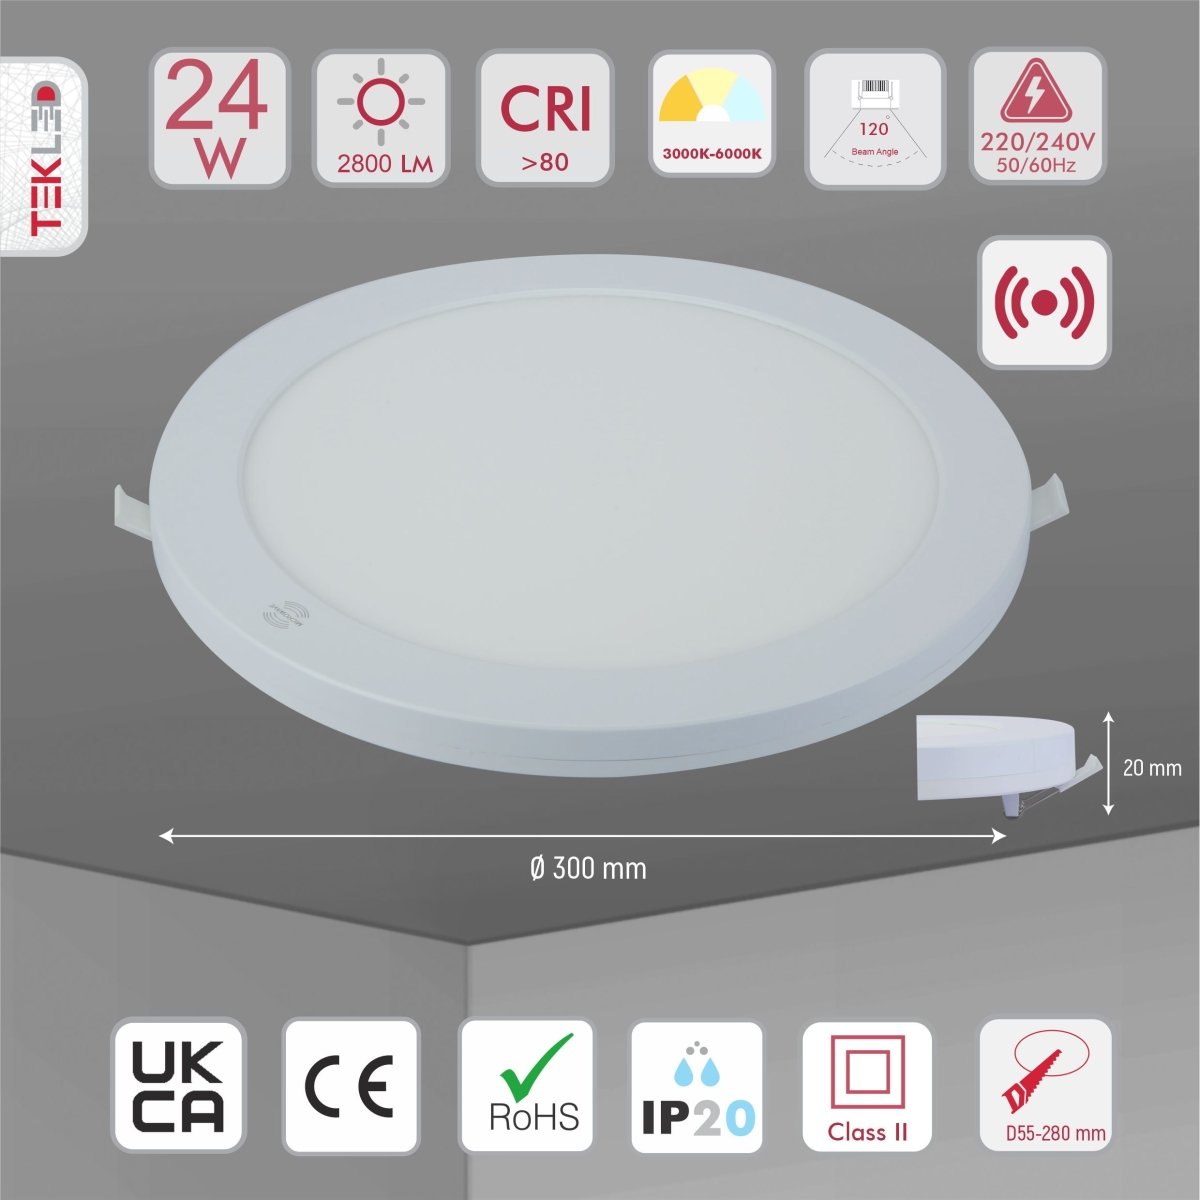 Product dimensions of universal downlight led round panel light 24w 3000-6000k warm white cool daylight